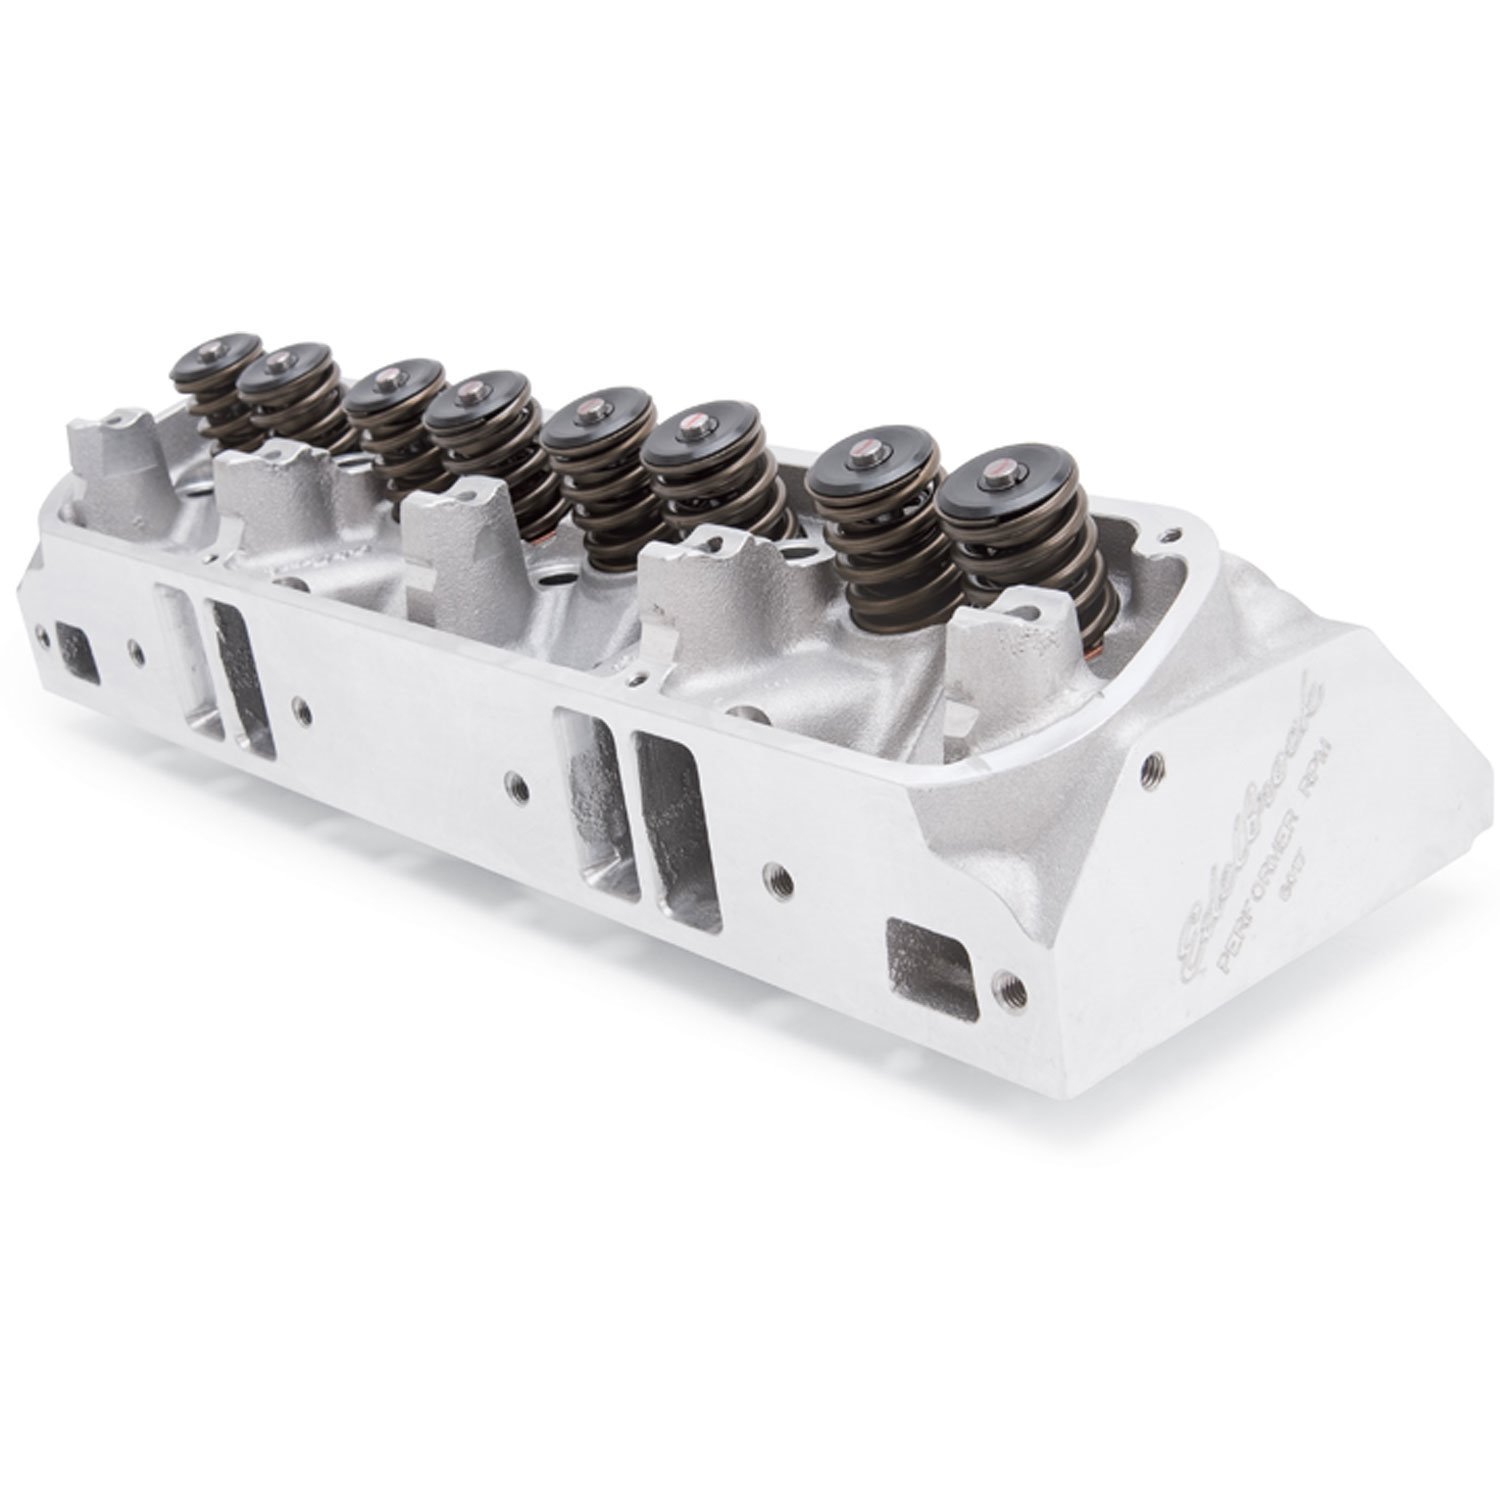 Performer RPM Cylinder Head for Chrysler 340 Small Block